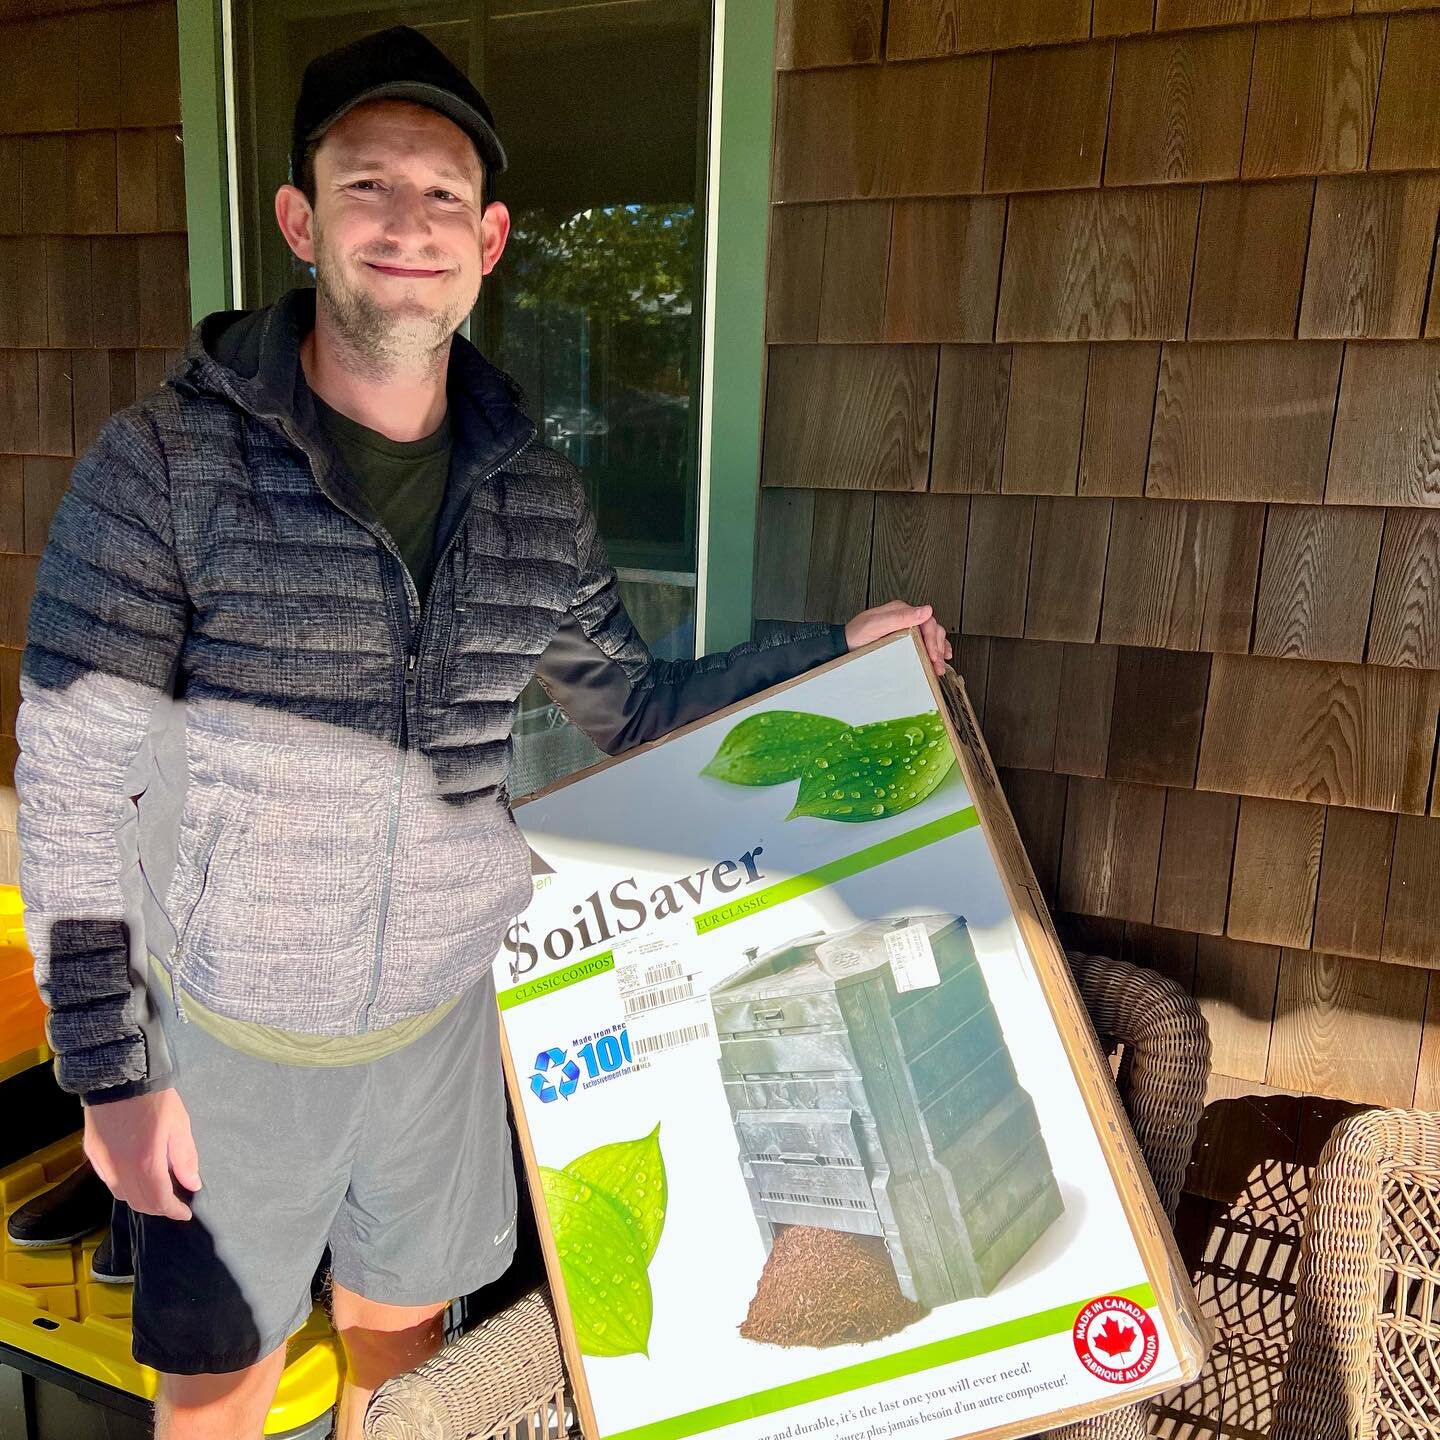 🥳 Here&rsquo;s a fab composter donation from Matt Sargenti to the the EHHS Environmental Club. Thank you, Matt!!

🔬The club members will be testing out different types of backyard composters to learn how each works. 

🤞Got a composter to donate? 
